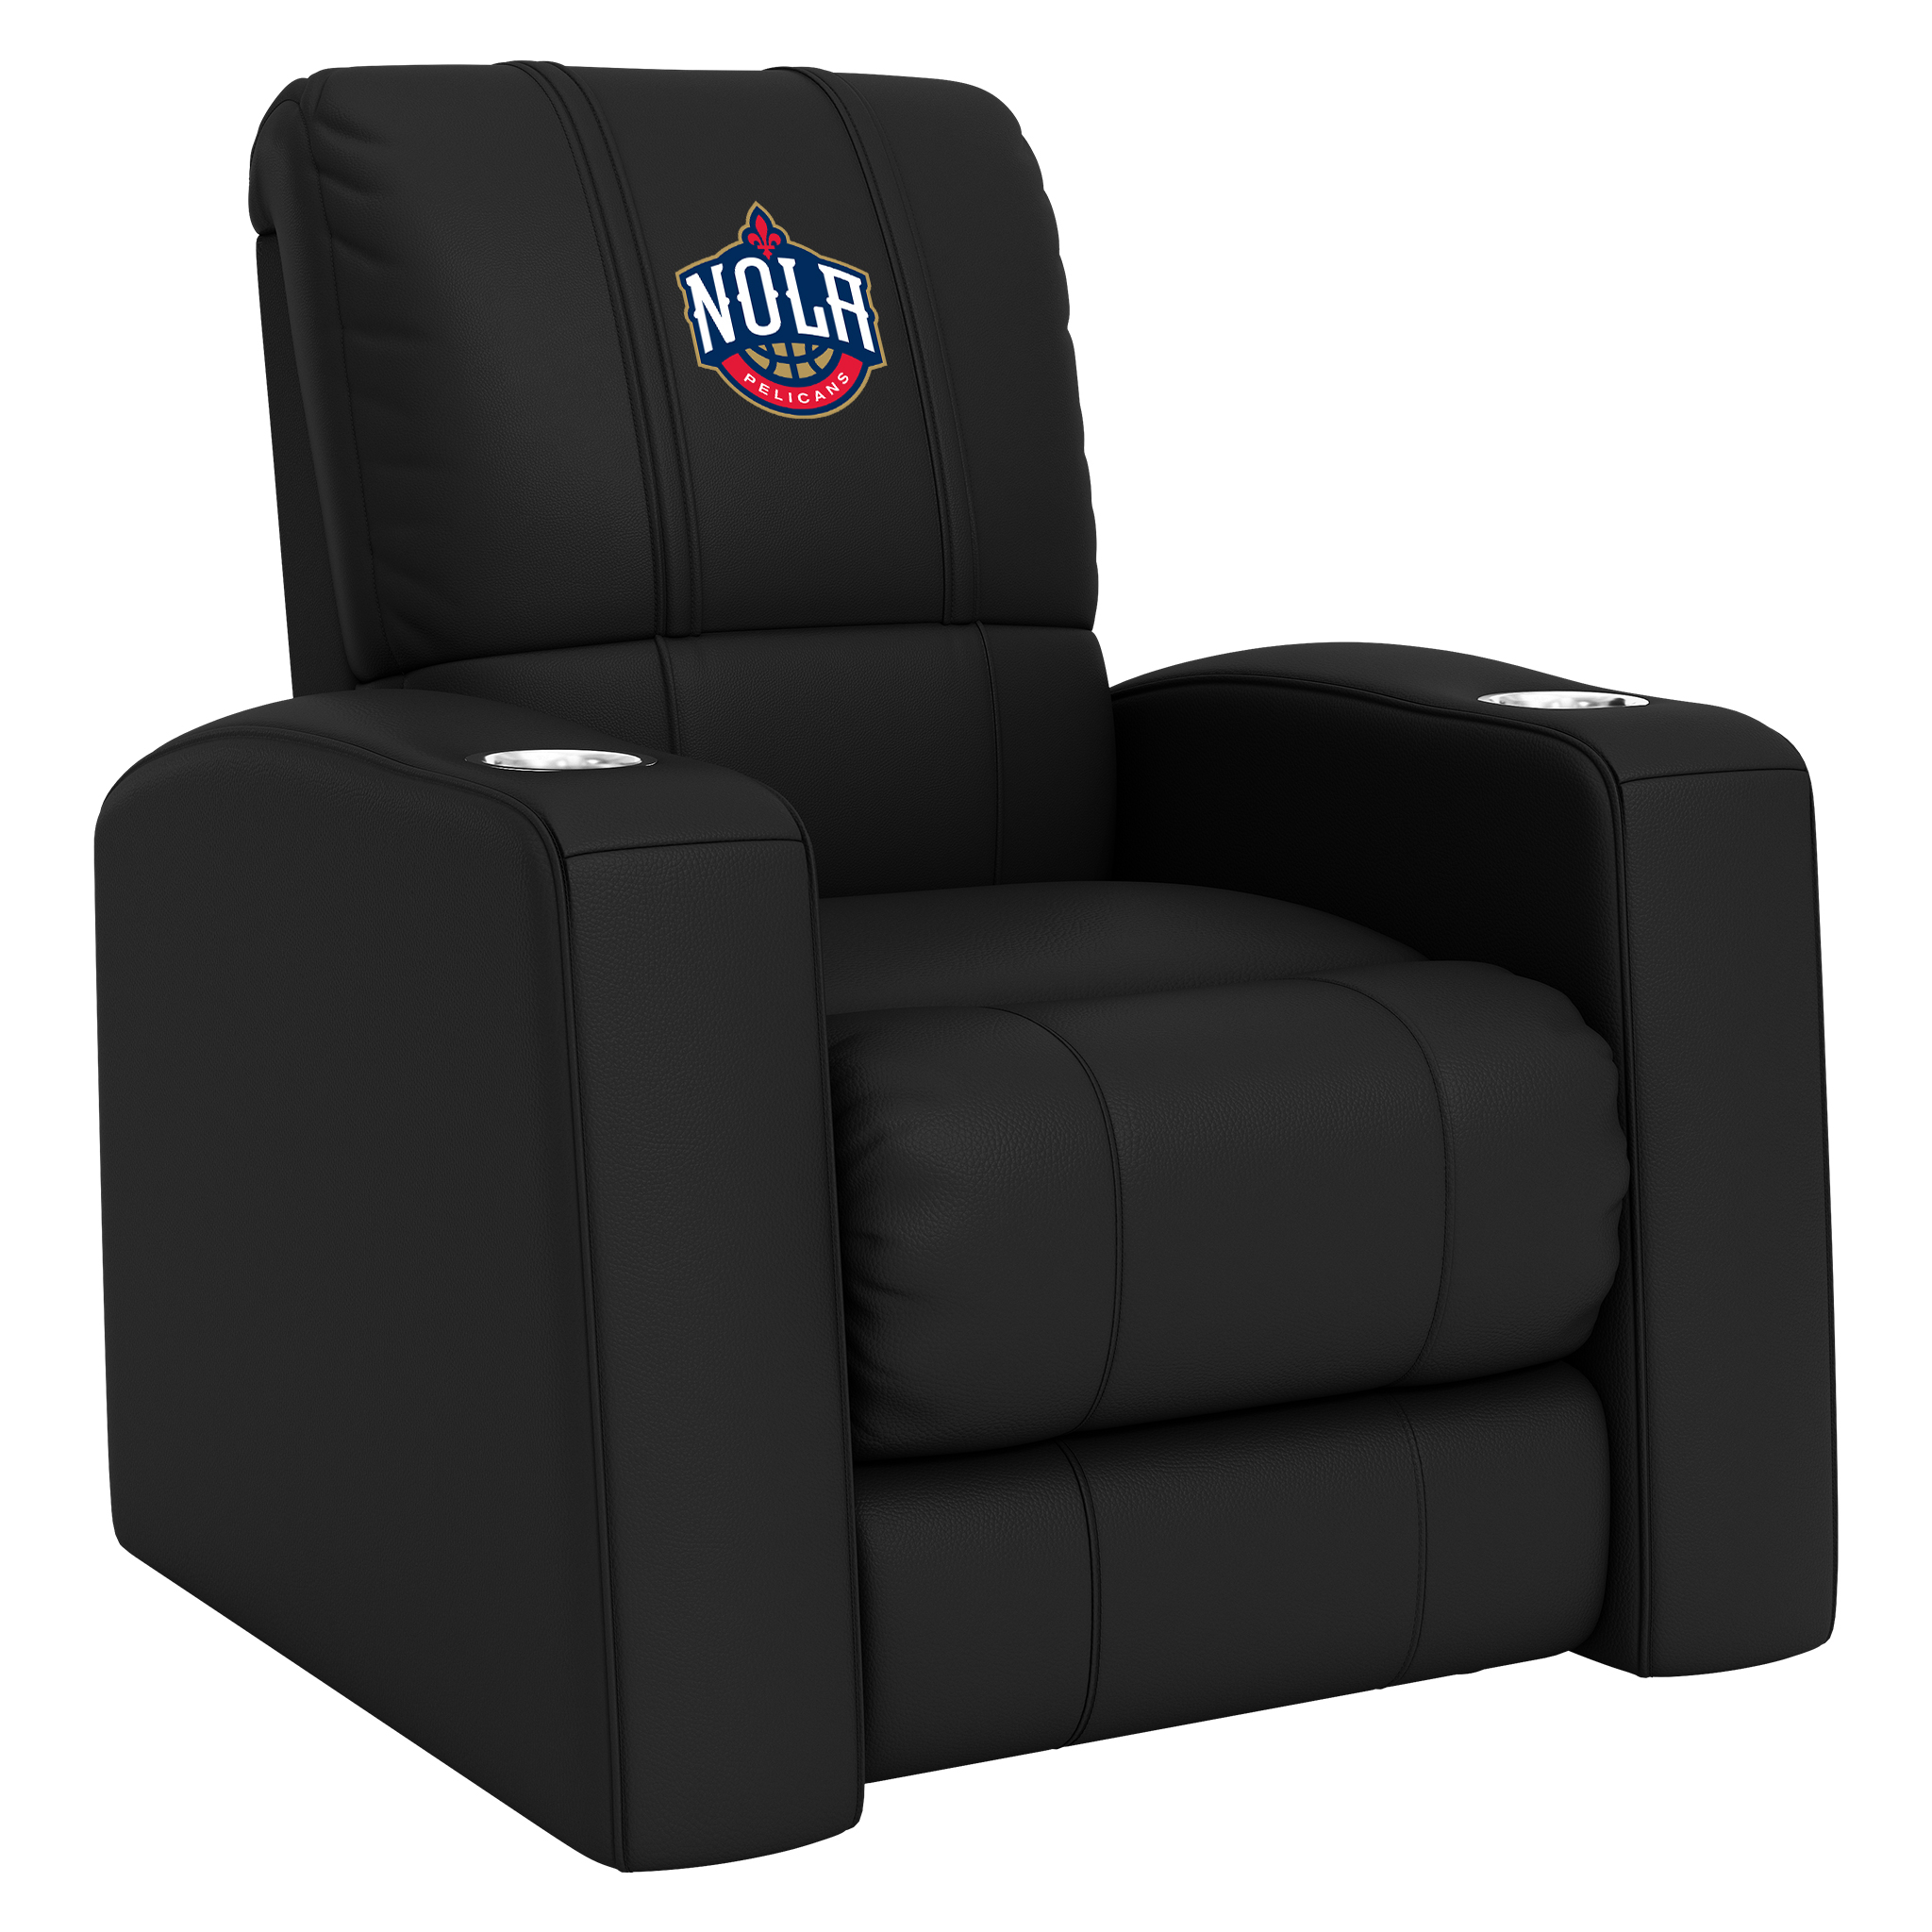 New Orleans Pelicans Home Theater Recliner with New Orleans Pelicans NOLA